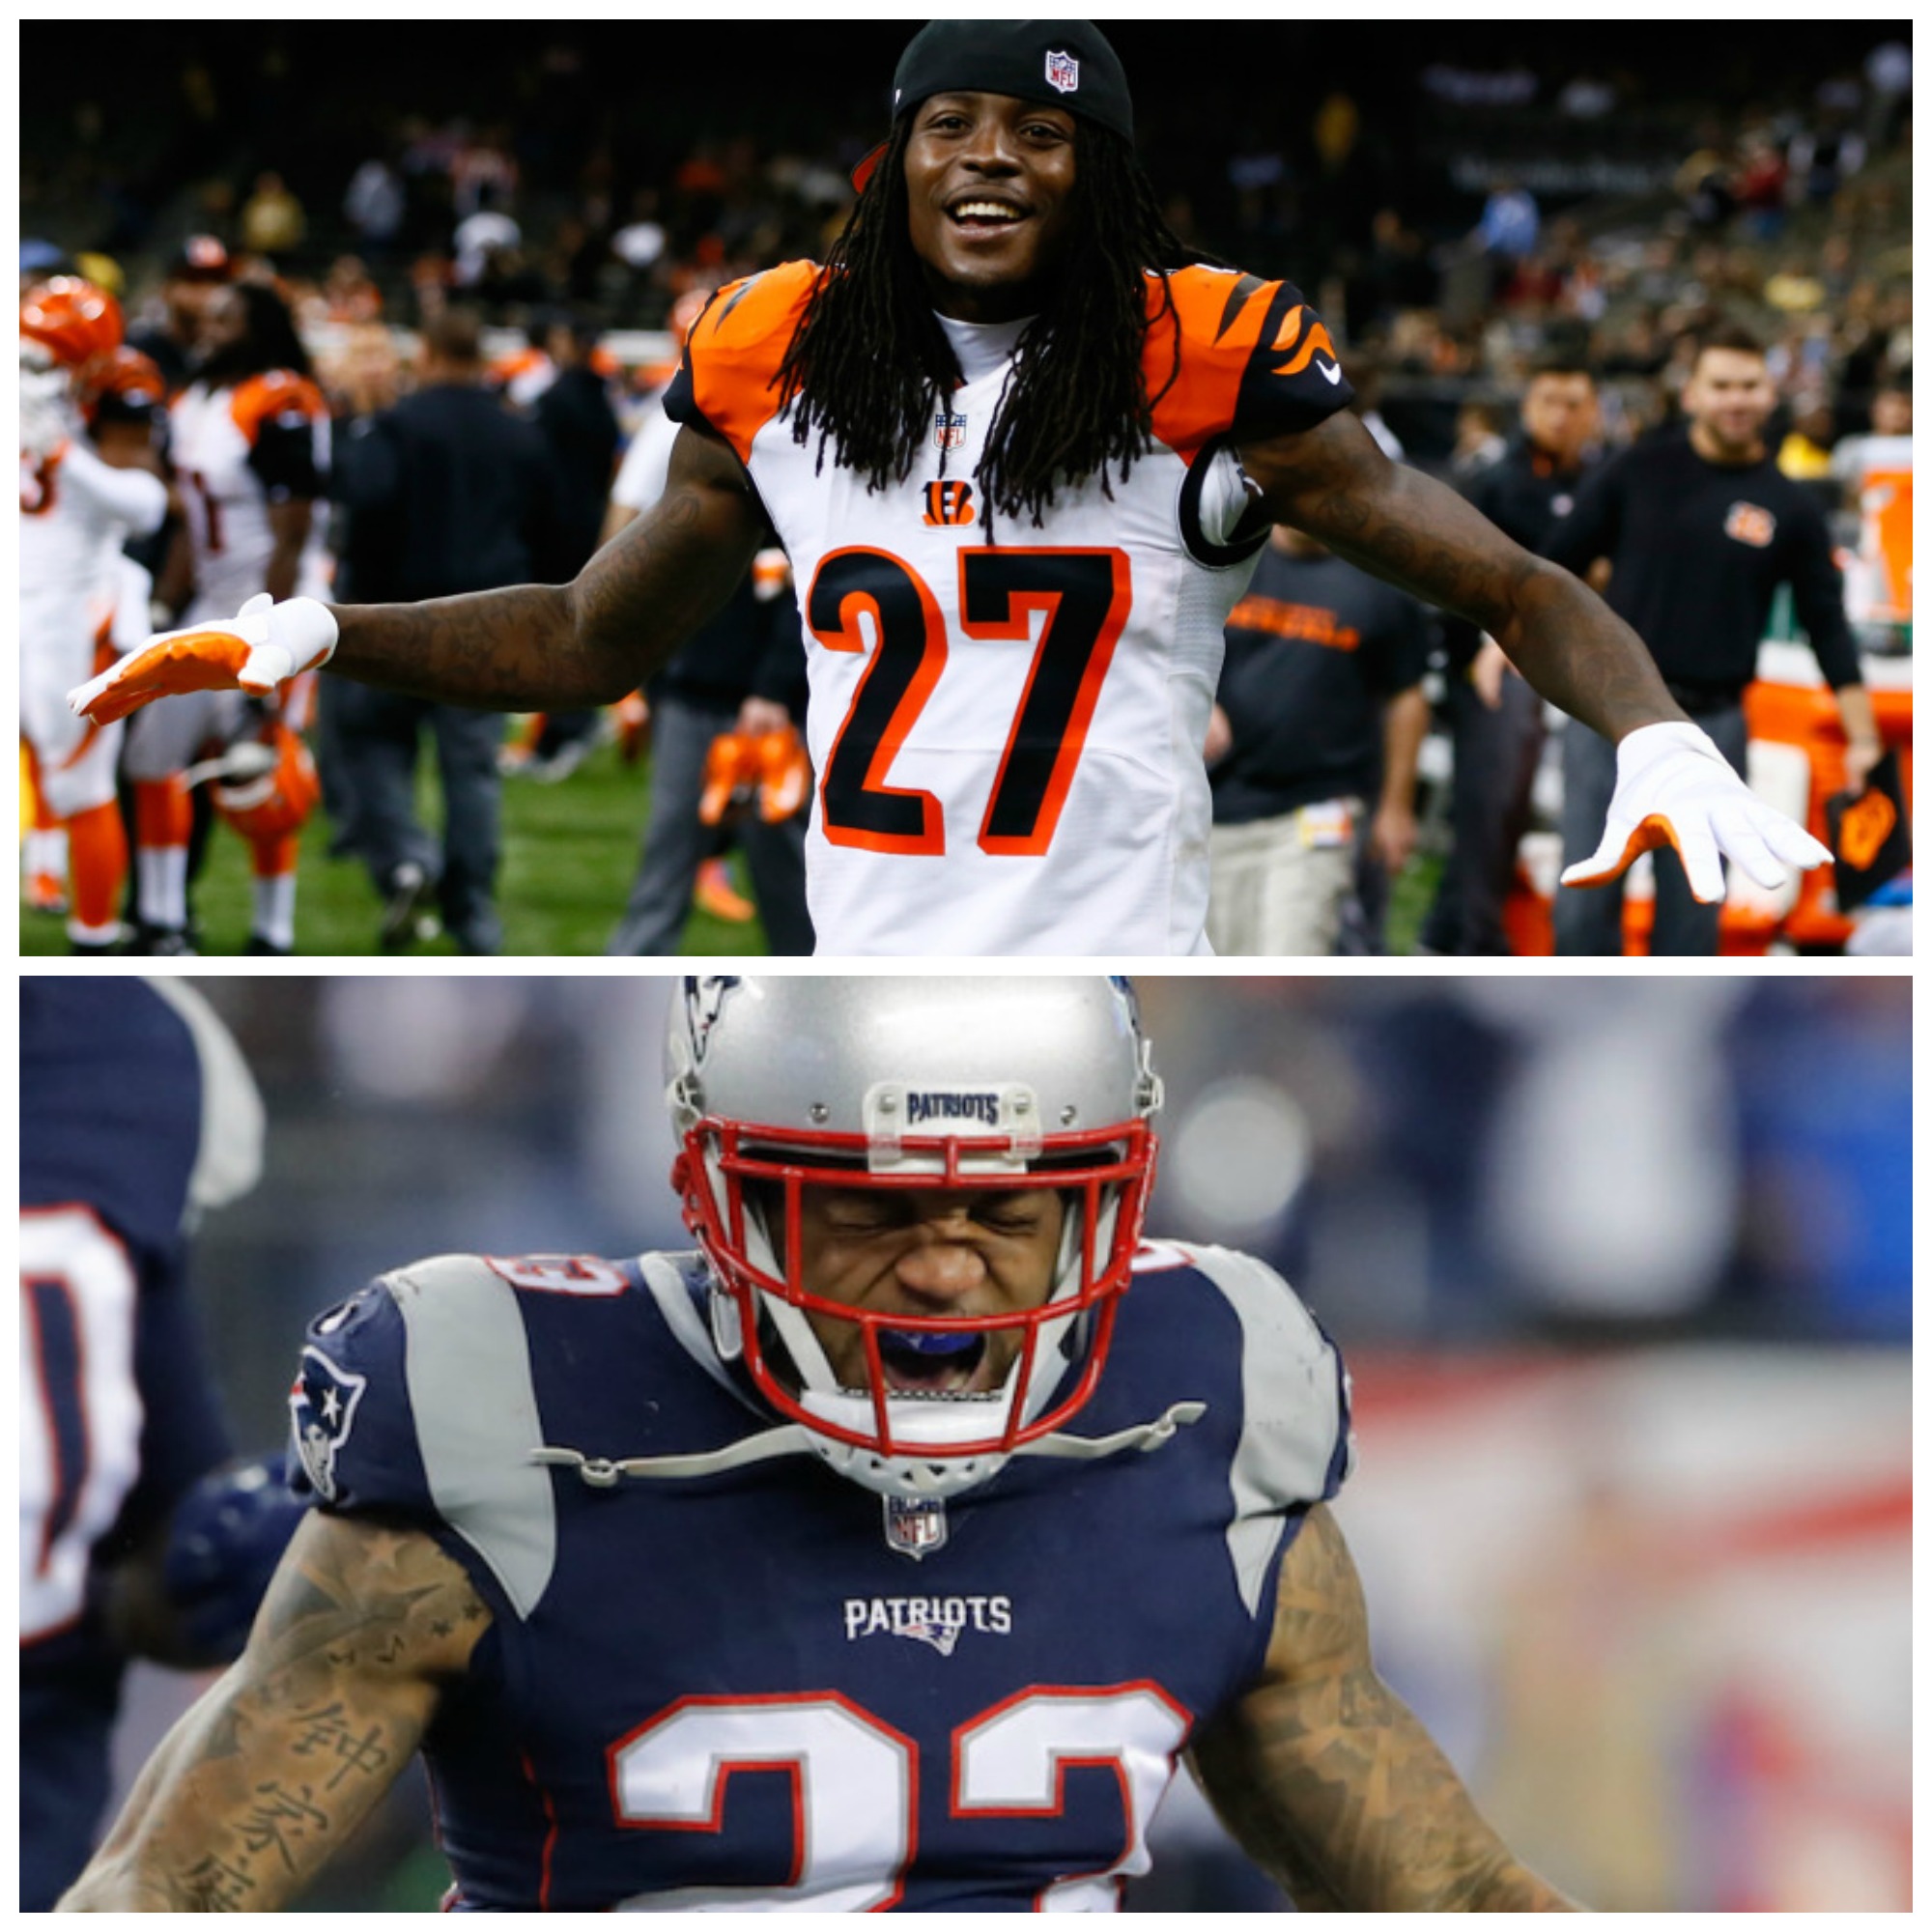 Thursday Night Tailgate NFL Podcast Spotlight on the Positive: Hear about the great things Bengals DB Dre Kirkpatrick & Patriots DB Patrick Chung are doing...